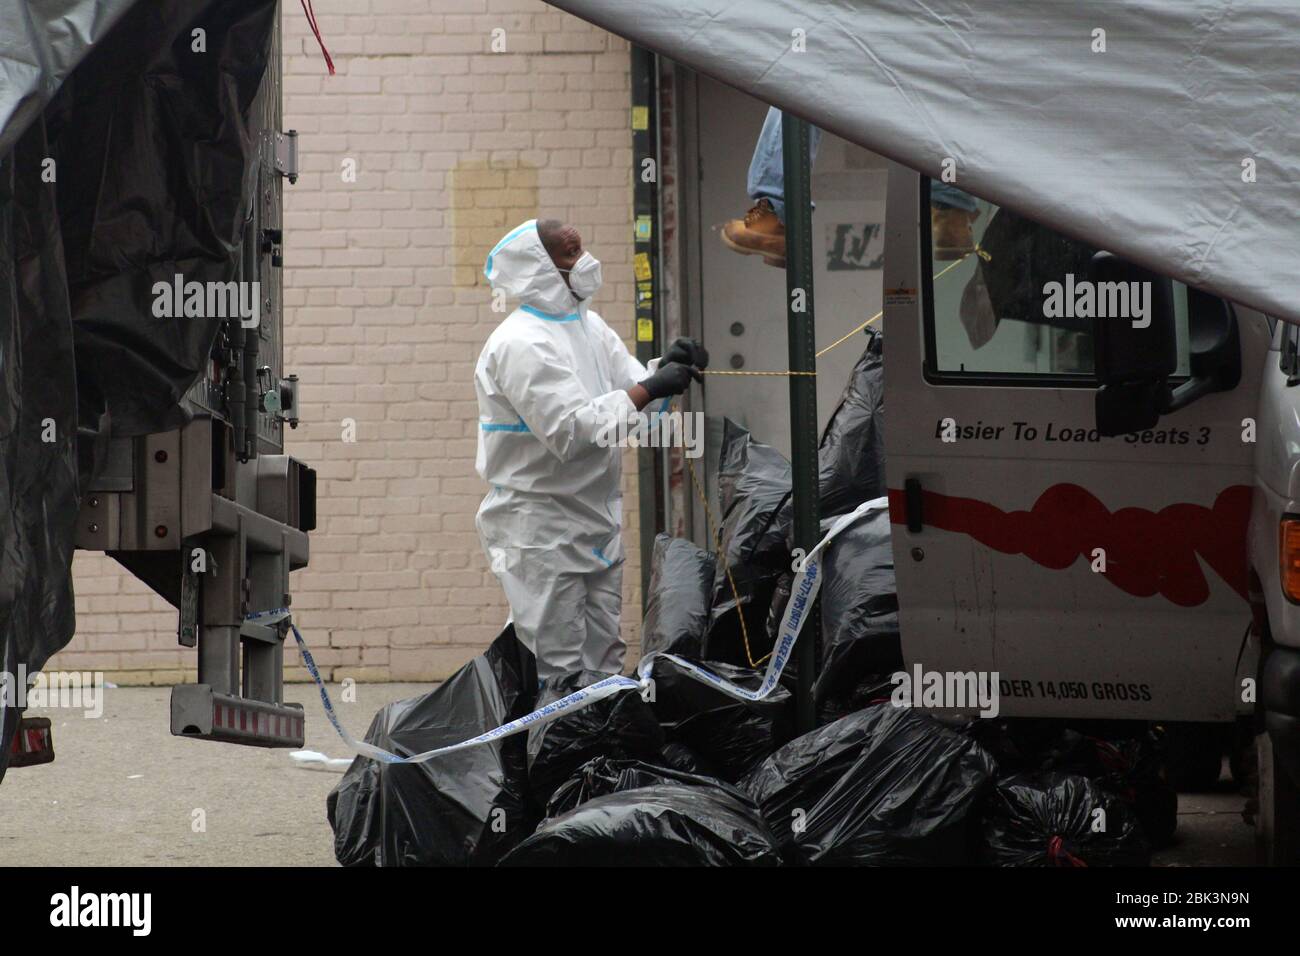 April 30, 2020, New York, New York, USA: This man, dressed in a hazmat, pulls a cord in the middle of large black trash bags to set up a tarpaulin at the back of a refrigerated truck next to the Andrew T. Cleckley Funeral Home in Brooklyn where corpses not properly cared have been removed. 60 bodies were stored in 4 non-refregerated vehiciles lining the street nearby stores. Neighbors reported a foul smell still persistent and fluids dripping from the trucks. The funeral home was overwhelmed by COVID-19 deaths, waiting for weeks for cremations in New York. (Credit Image: © Marie Le Ble/ZUMA Wi Stock Photo